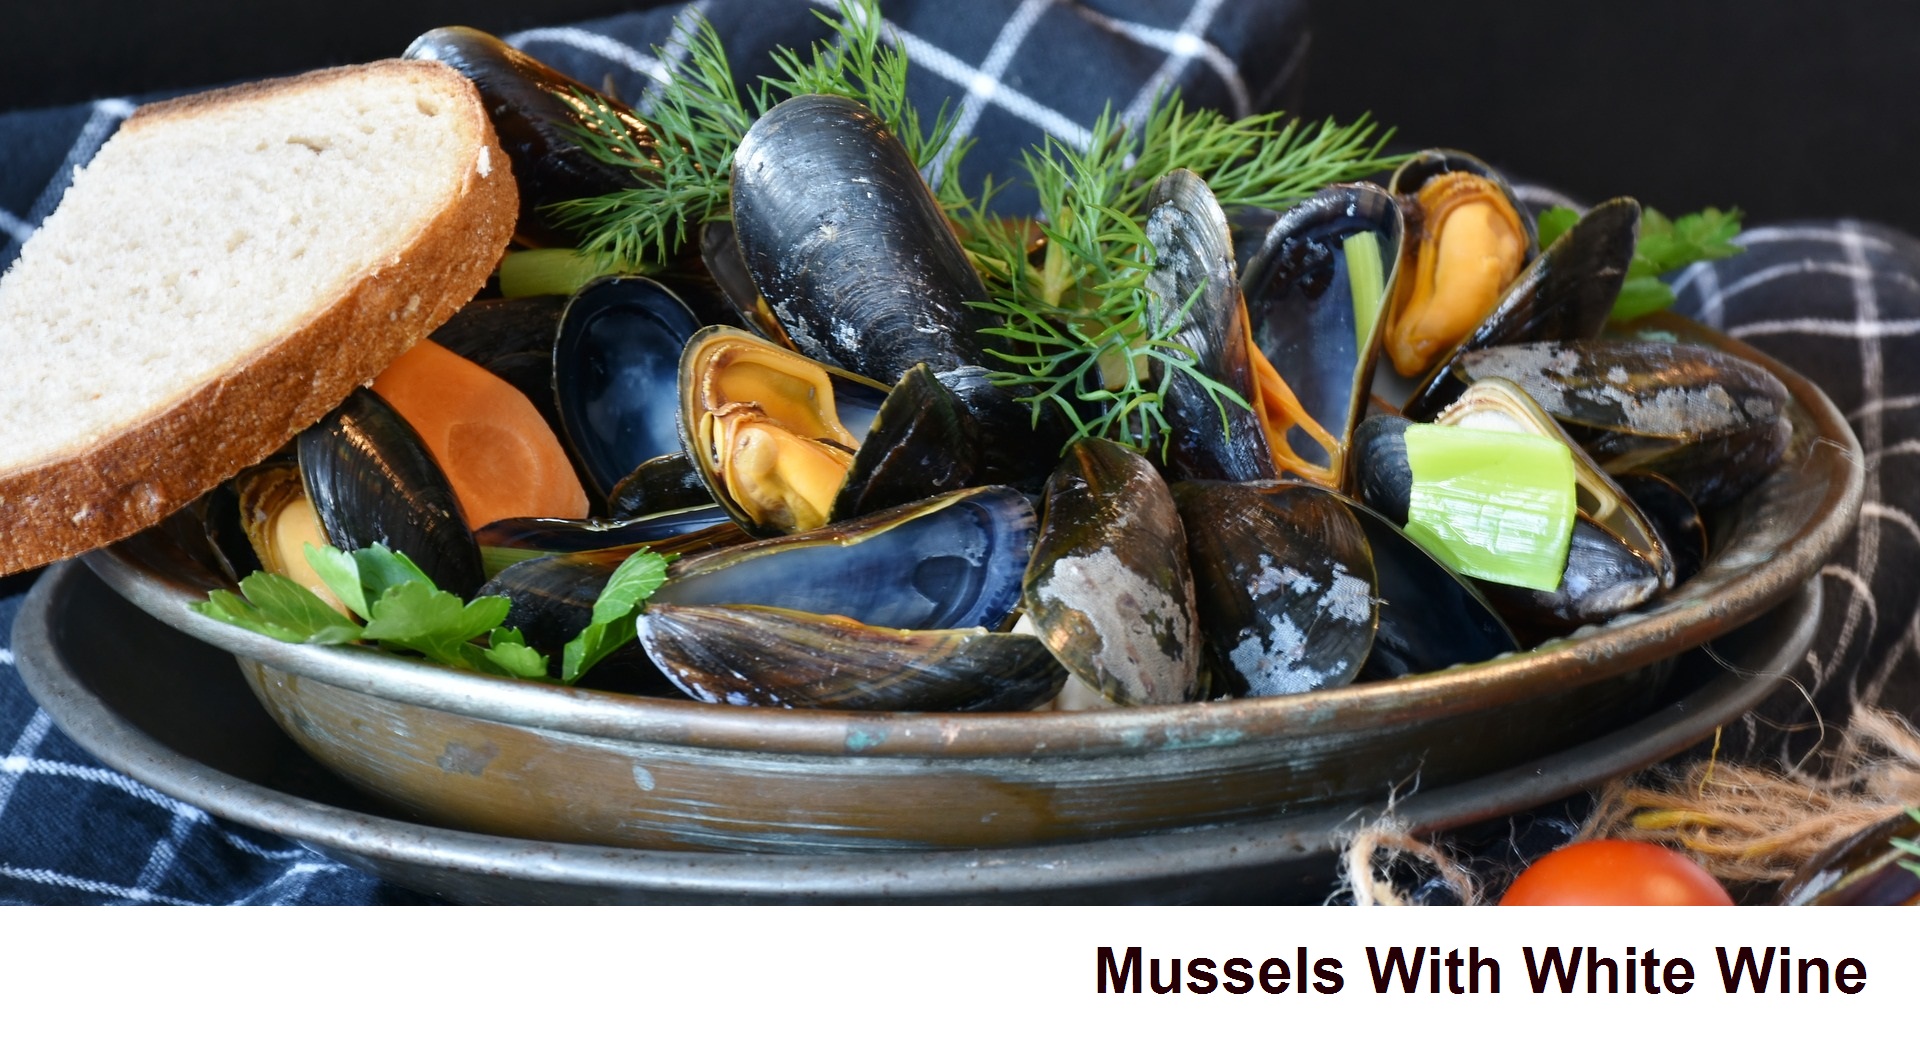 Mussles with white wine